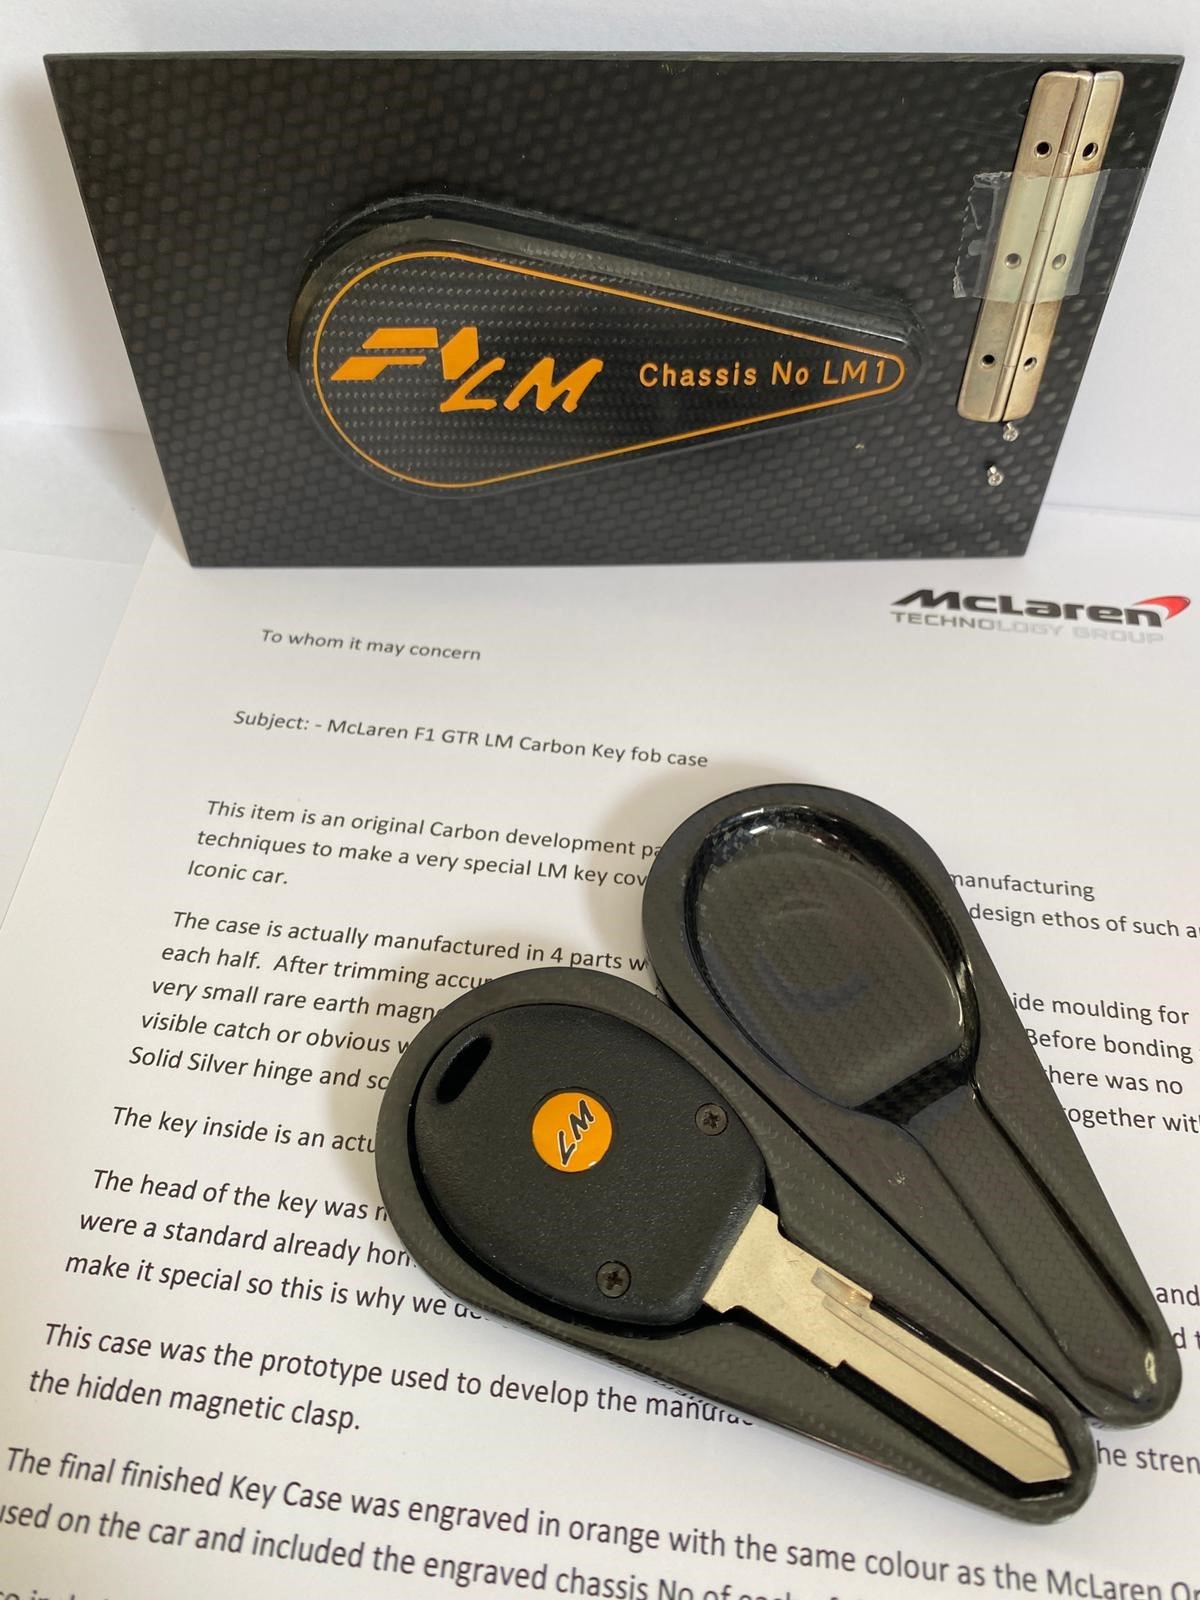 MCLAREN F1 LM KEY WITH PROTOTYPE CARBON KEY CASE for sale by auction in Auckland, New Zealand, New Zealand